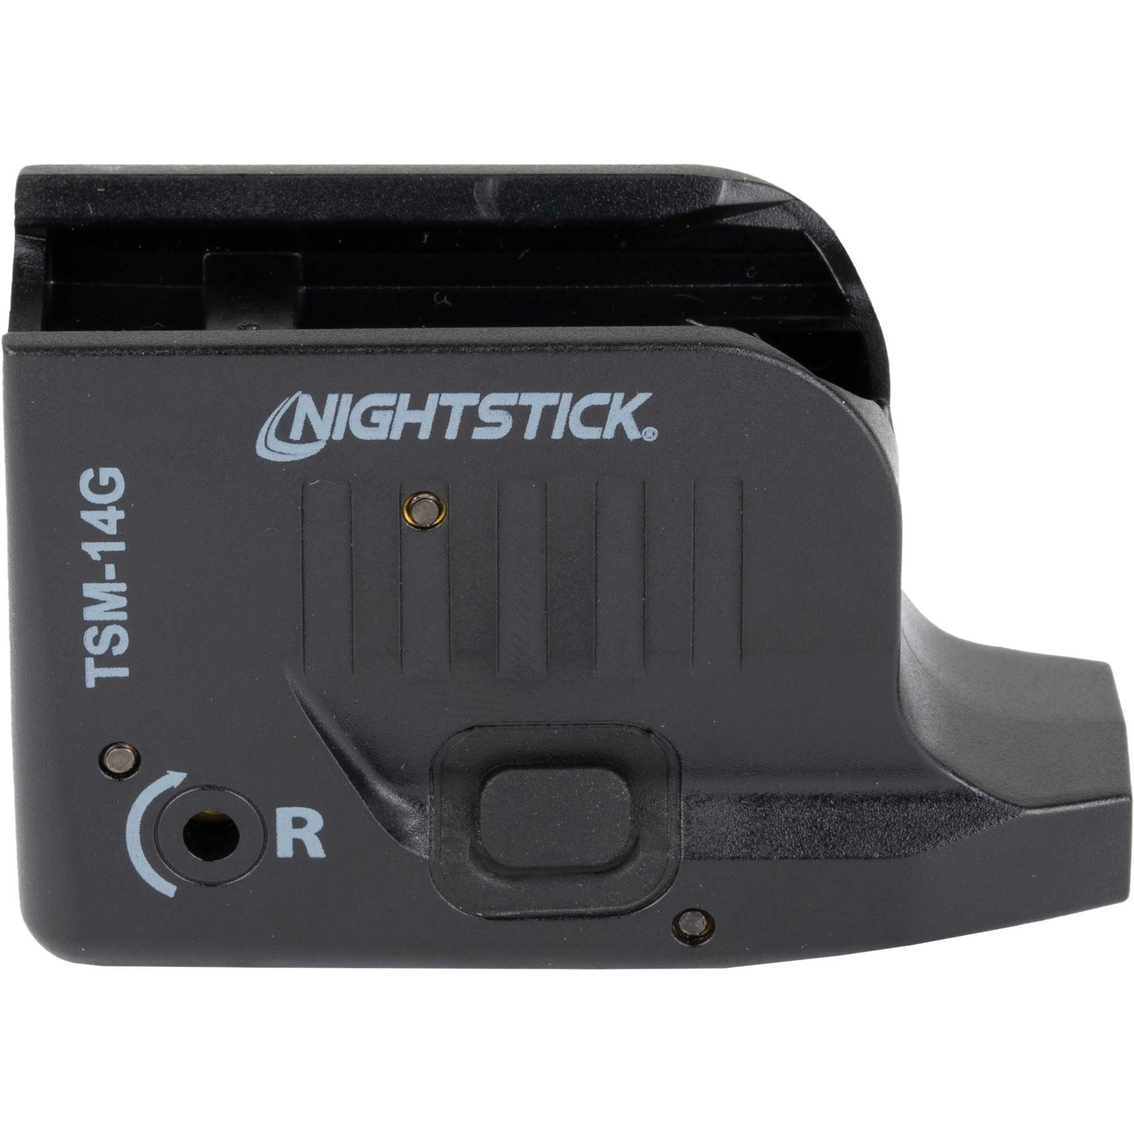 Nightstick Tsm-14g Weaponlight With Green Laser Fits Fits Glock 43/43x ...